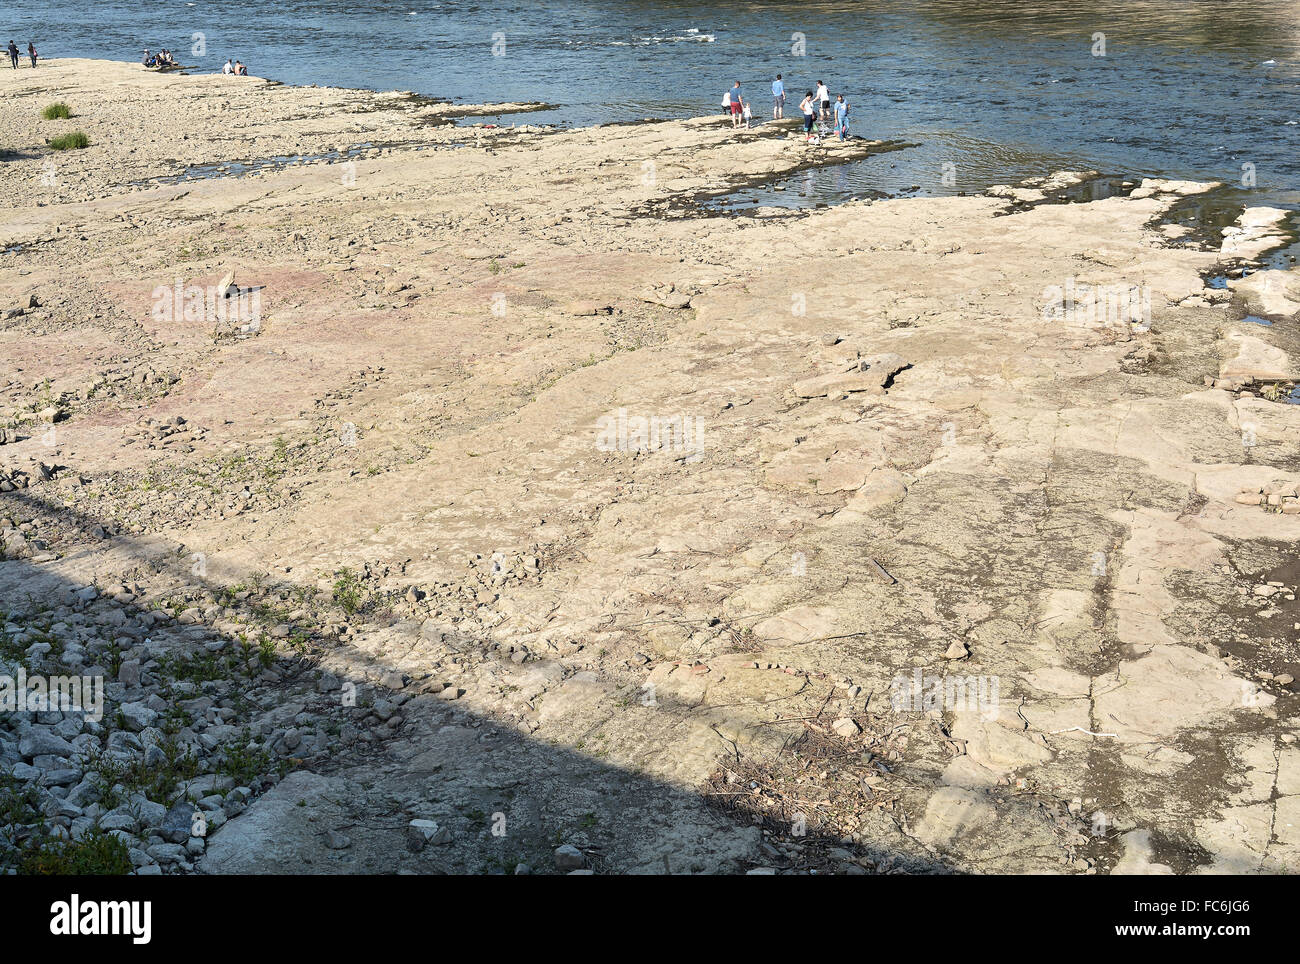 People in the dry riverbed Stock Photo